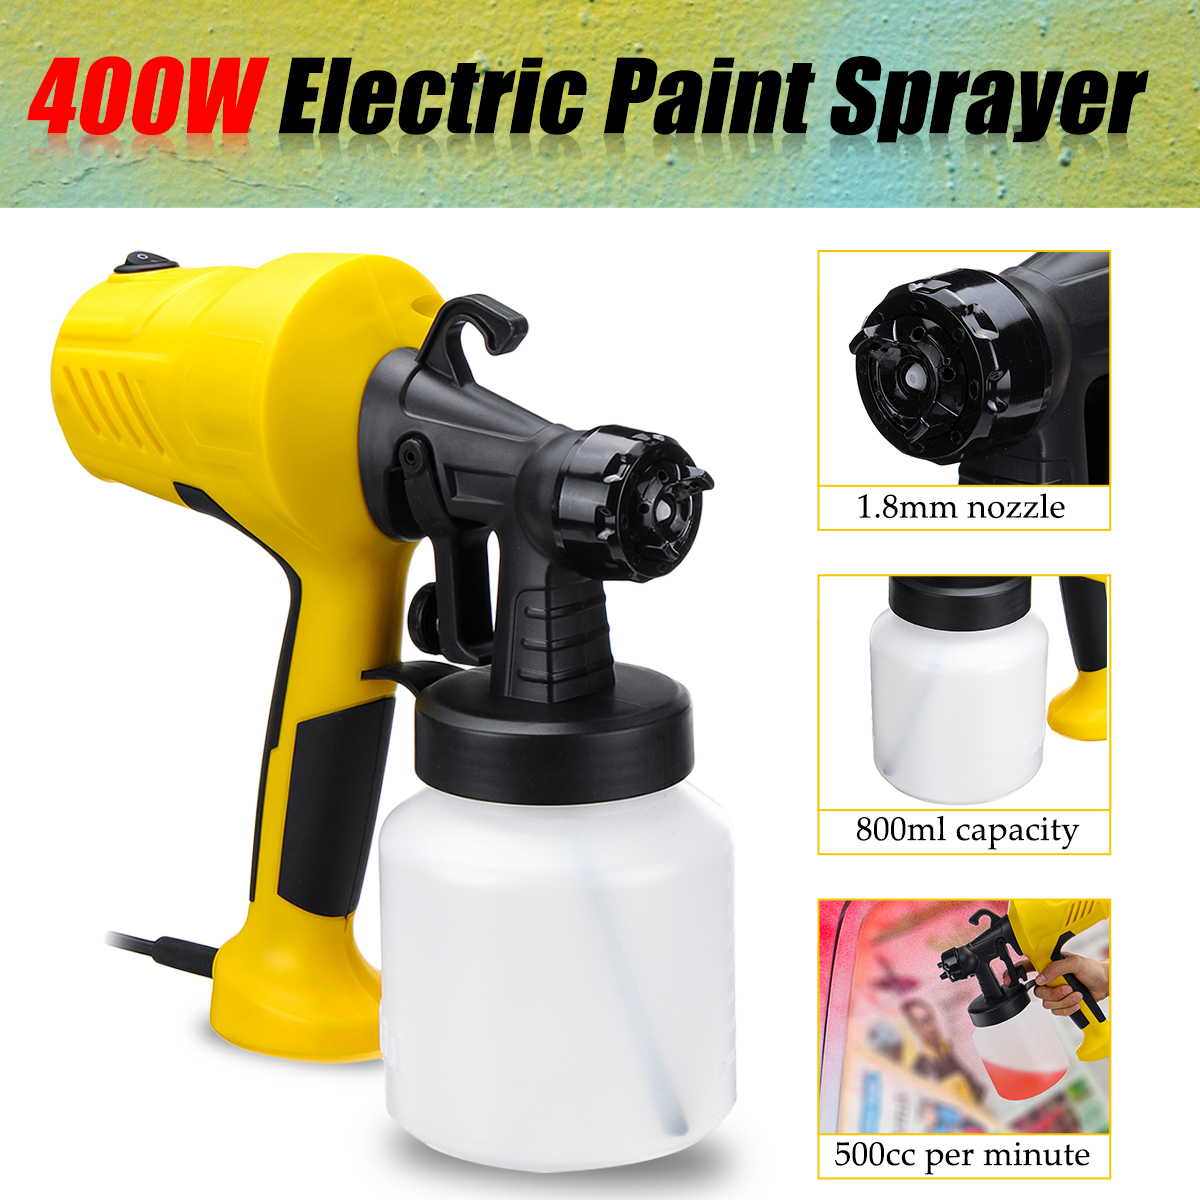 Electric-Spray-Paint-Sprayer-Compressor-for-Car-Wood-Wall-with-Flow-Control-1701162-3